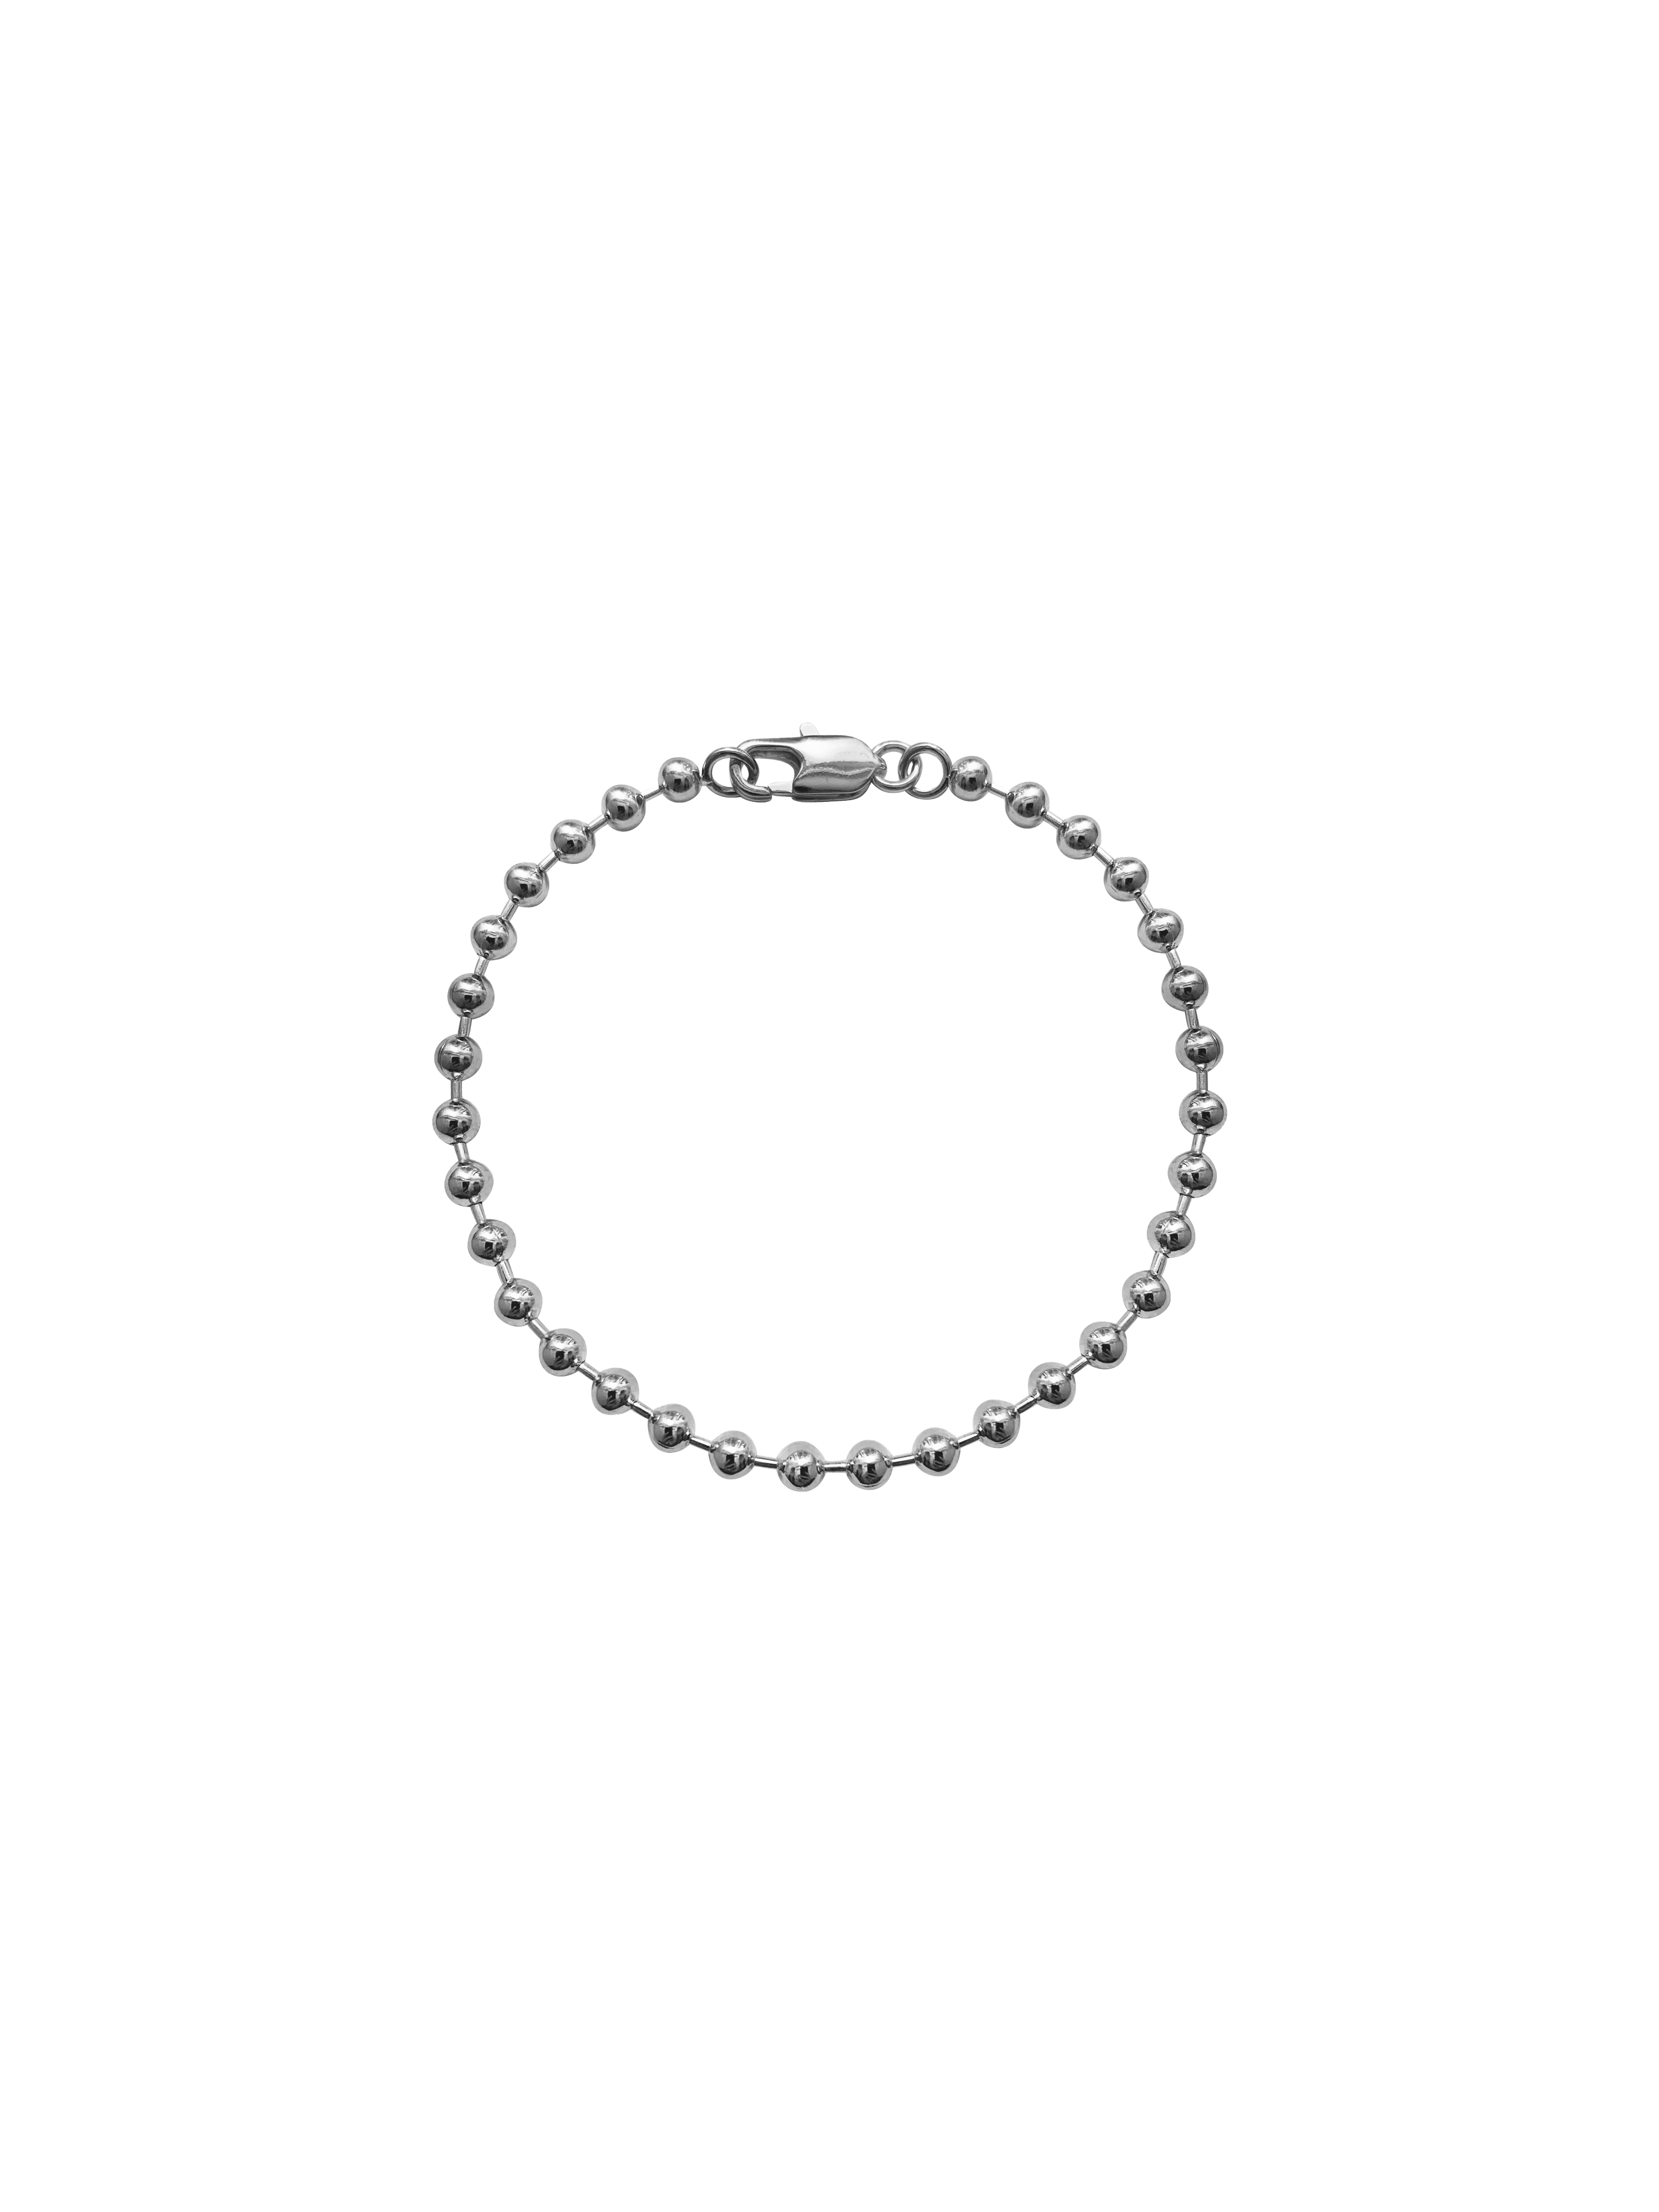 Stainless Steel Silver Plated Bead Necklace Bracelet Factory | JR Fashion  Accessories